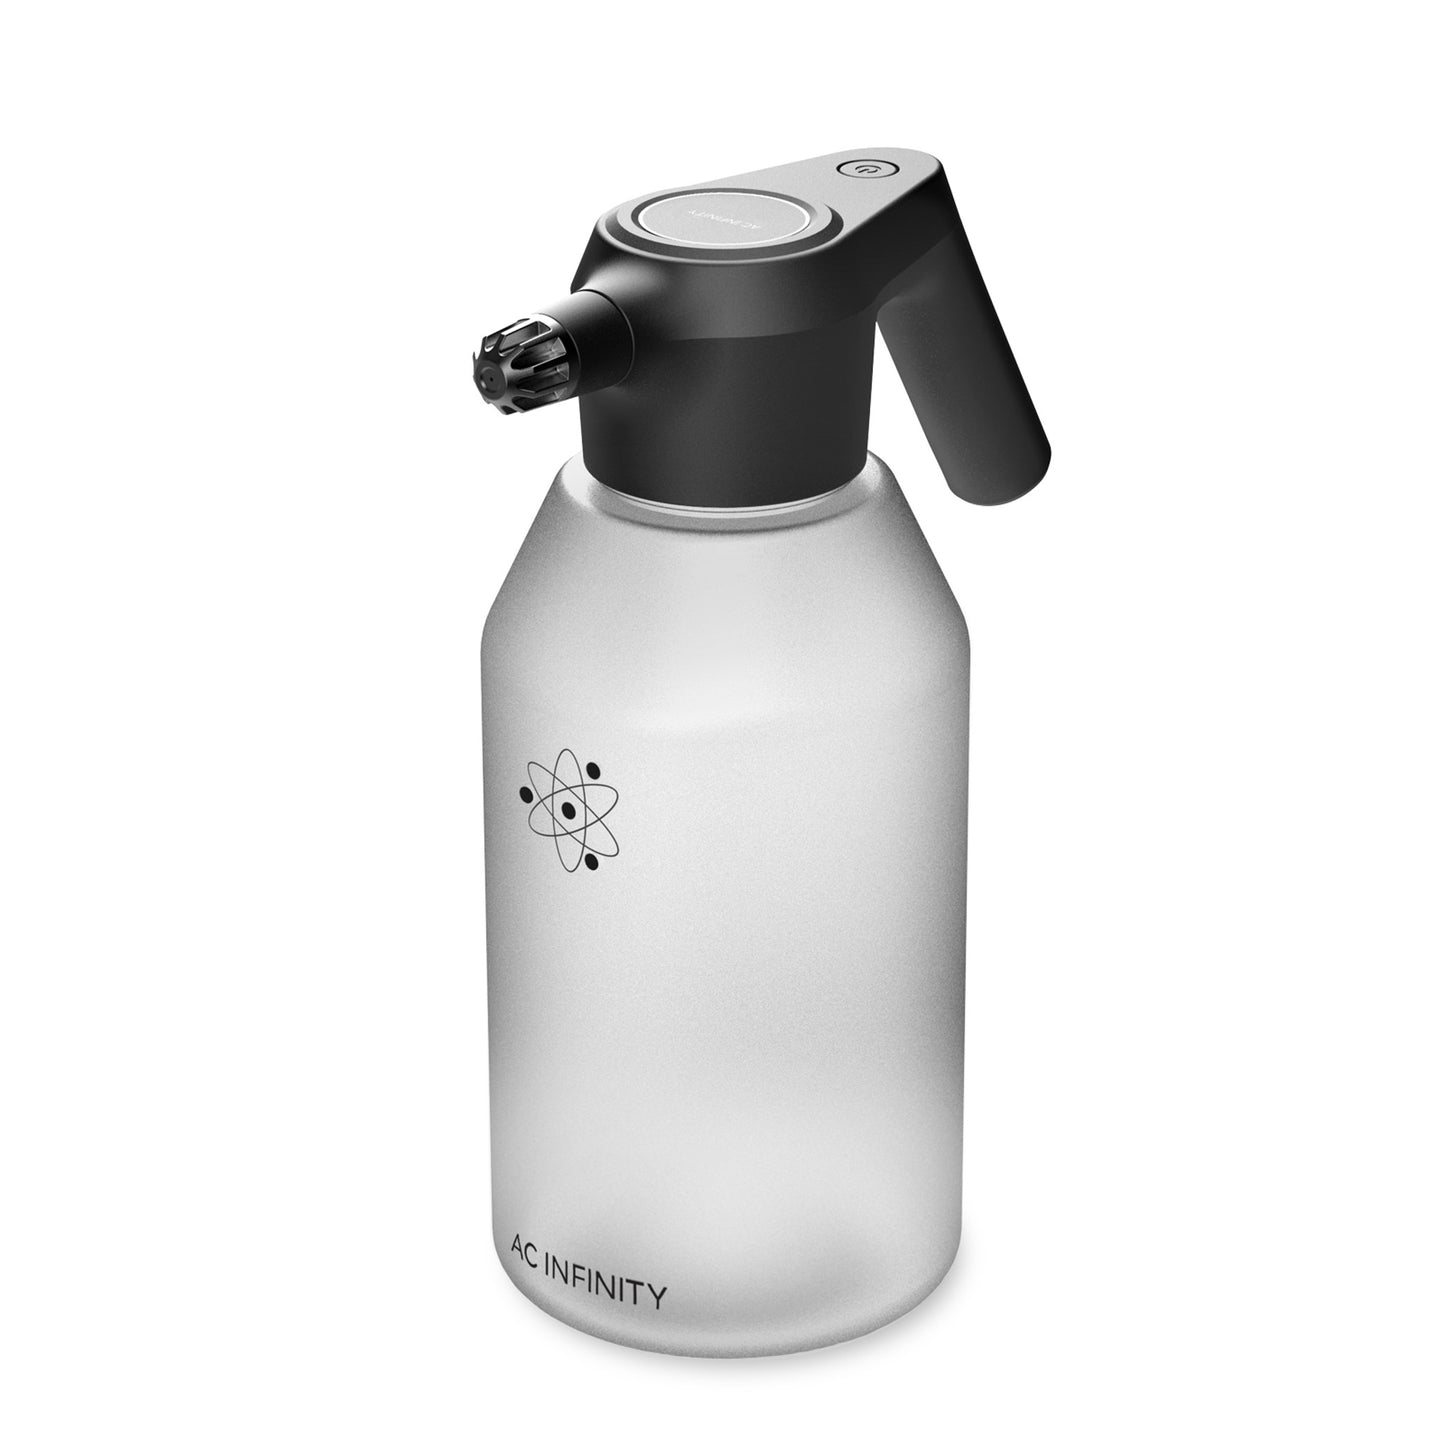 AC Infinity Automatic Water Mister Sprayers (2L Electric Misters)